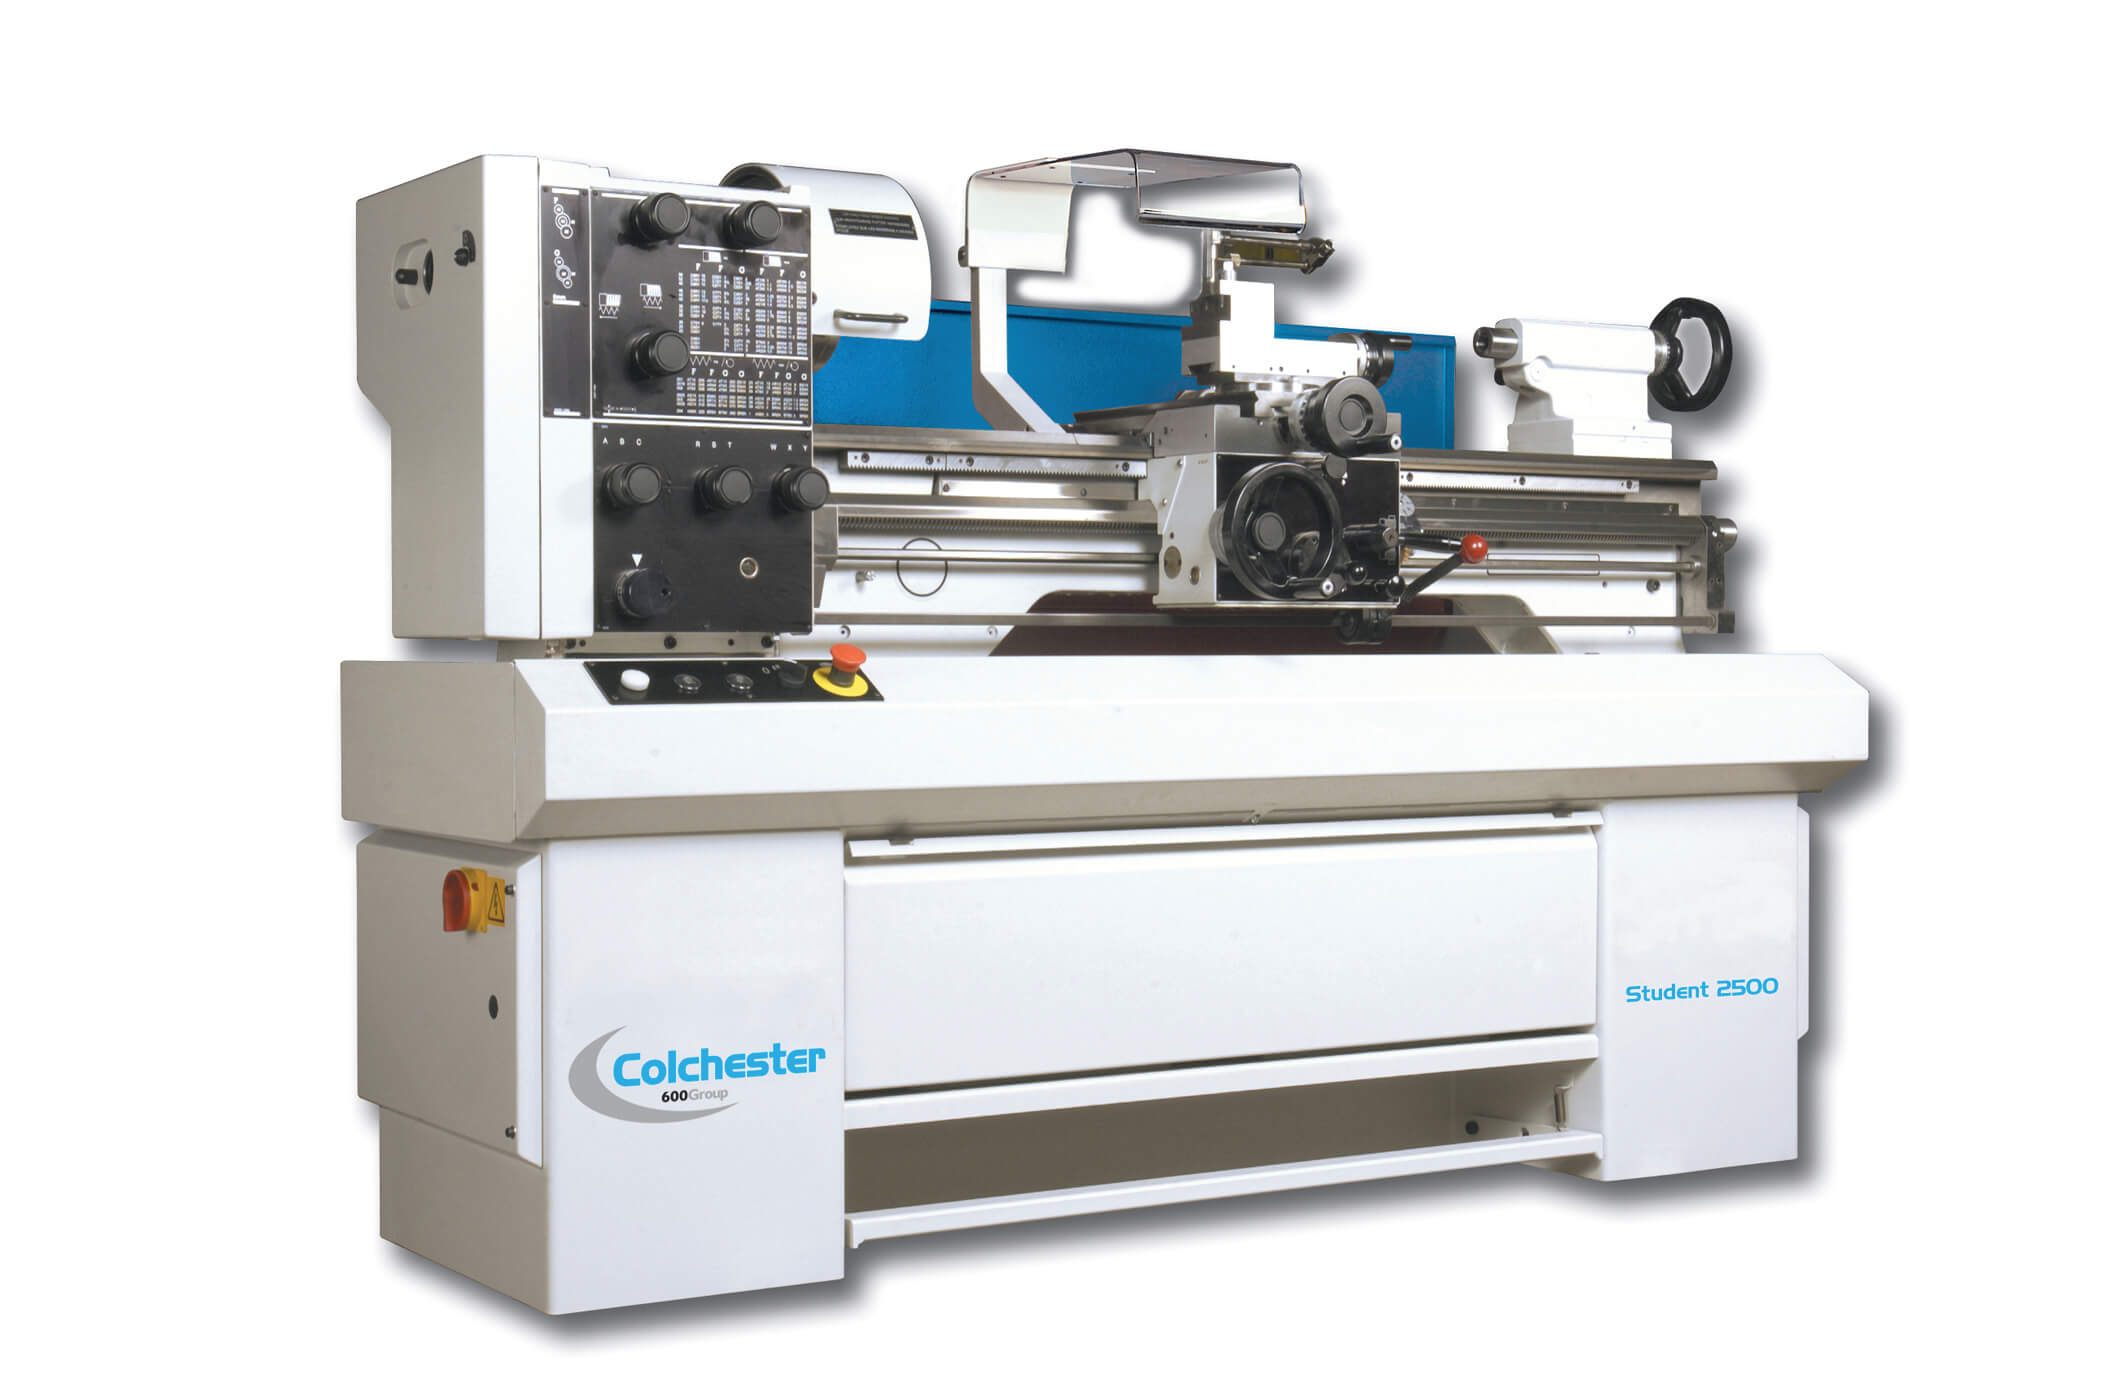 Colchester Student 2500 Engineering Lathe - 1000mm bed - Single Phase